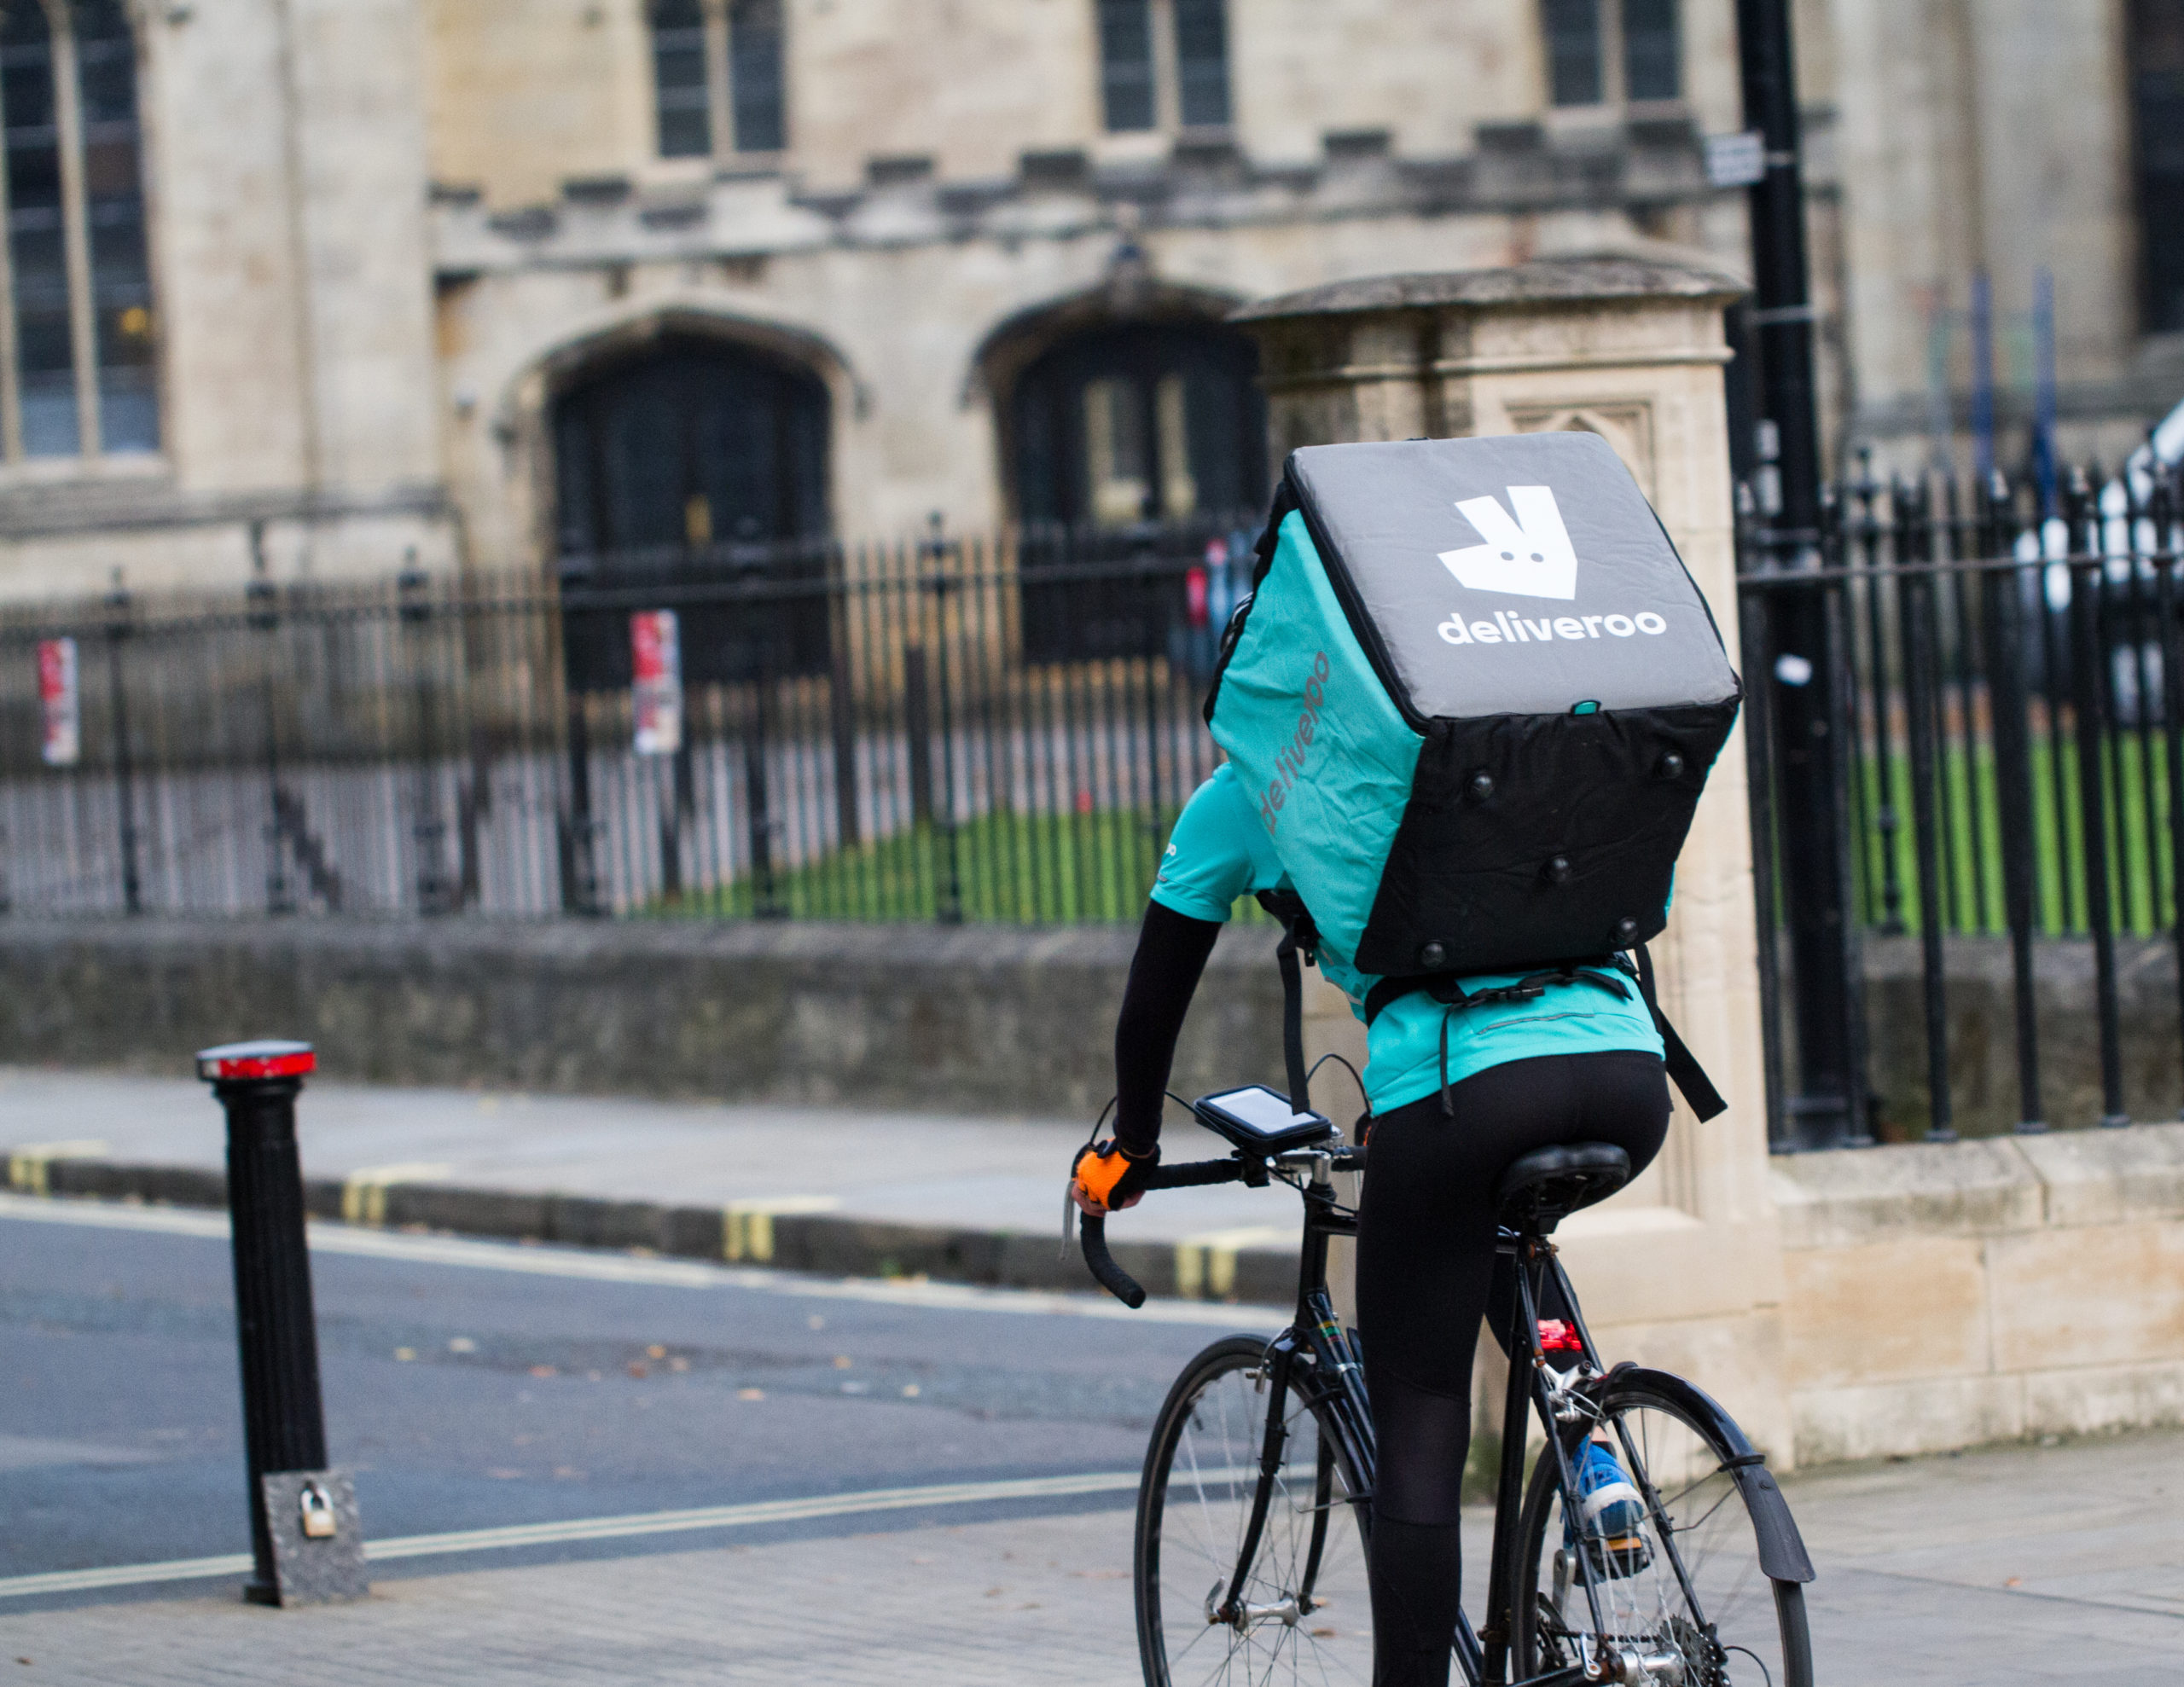 Deliveroo Rider on Bicycle